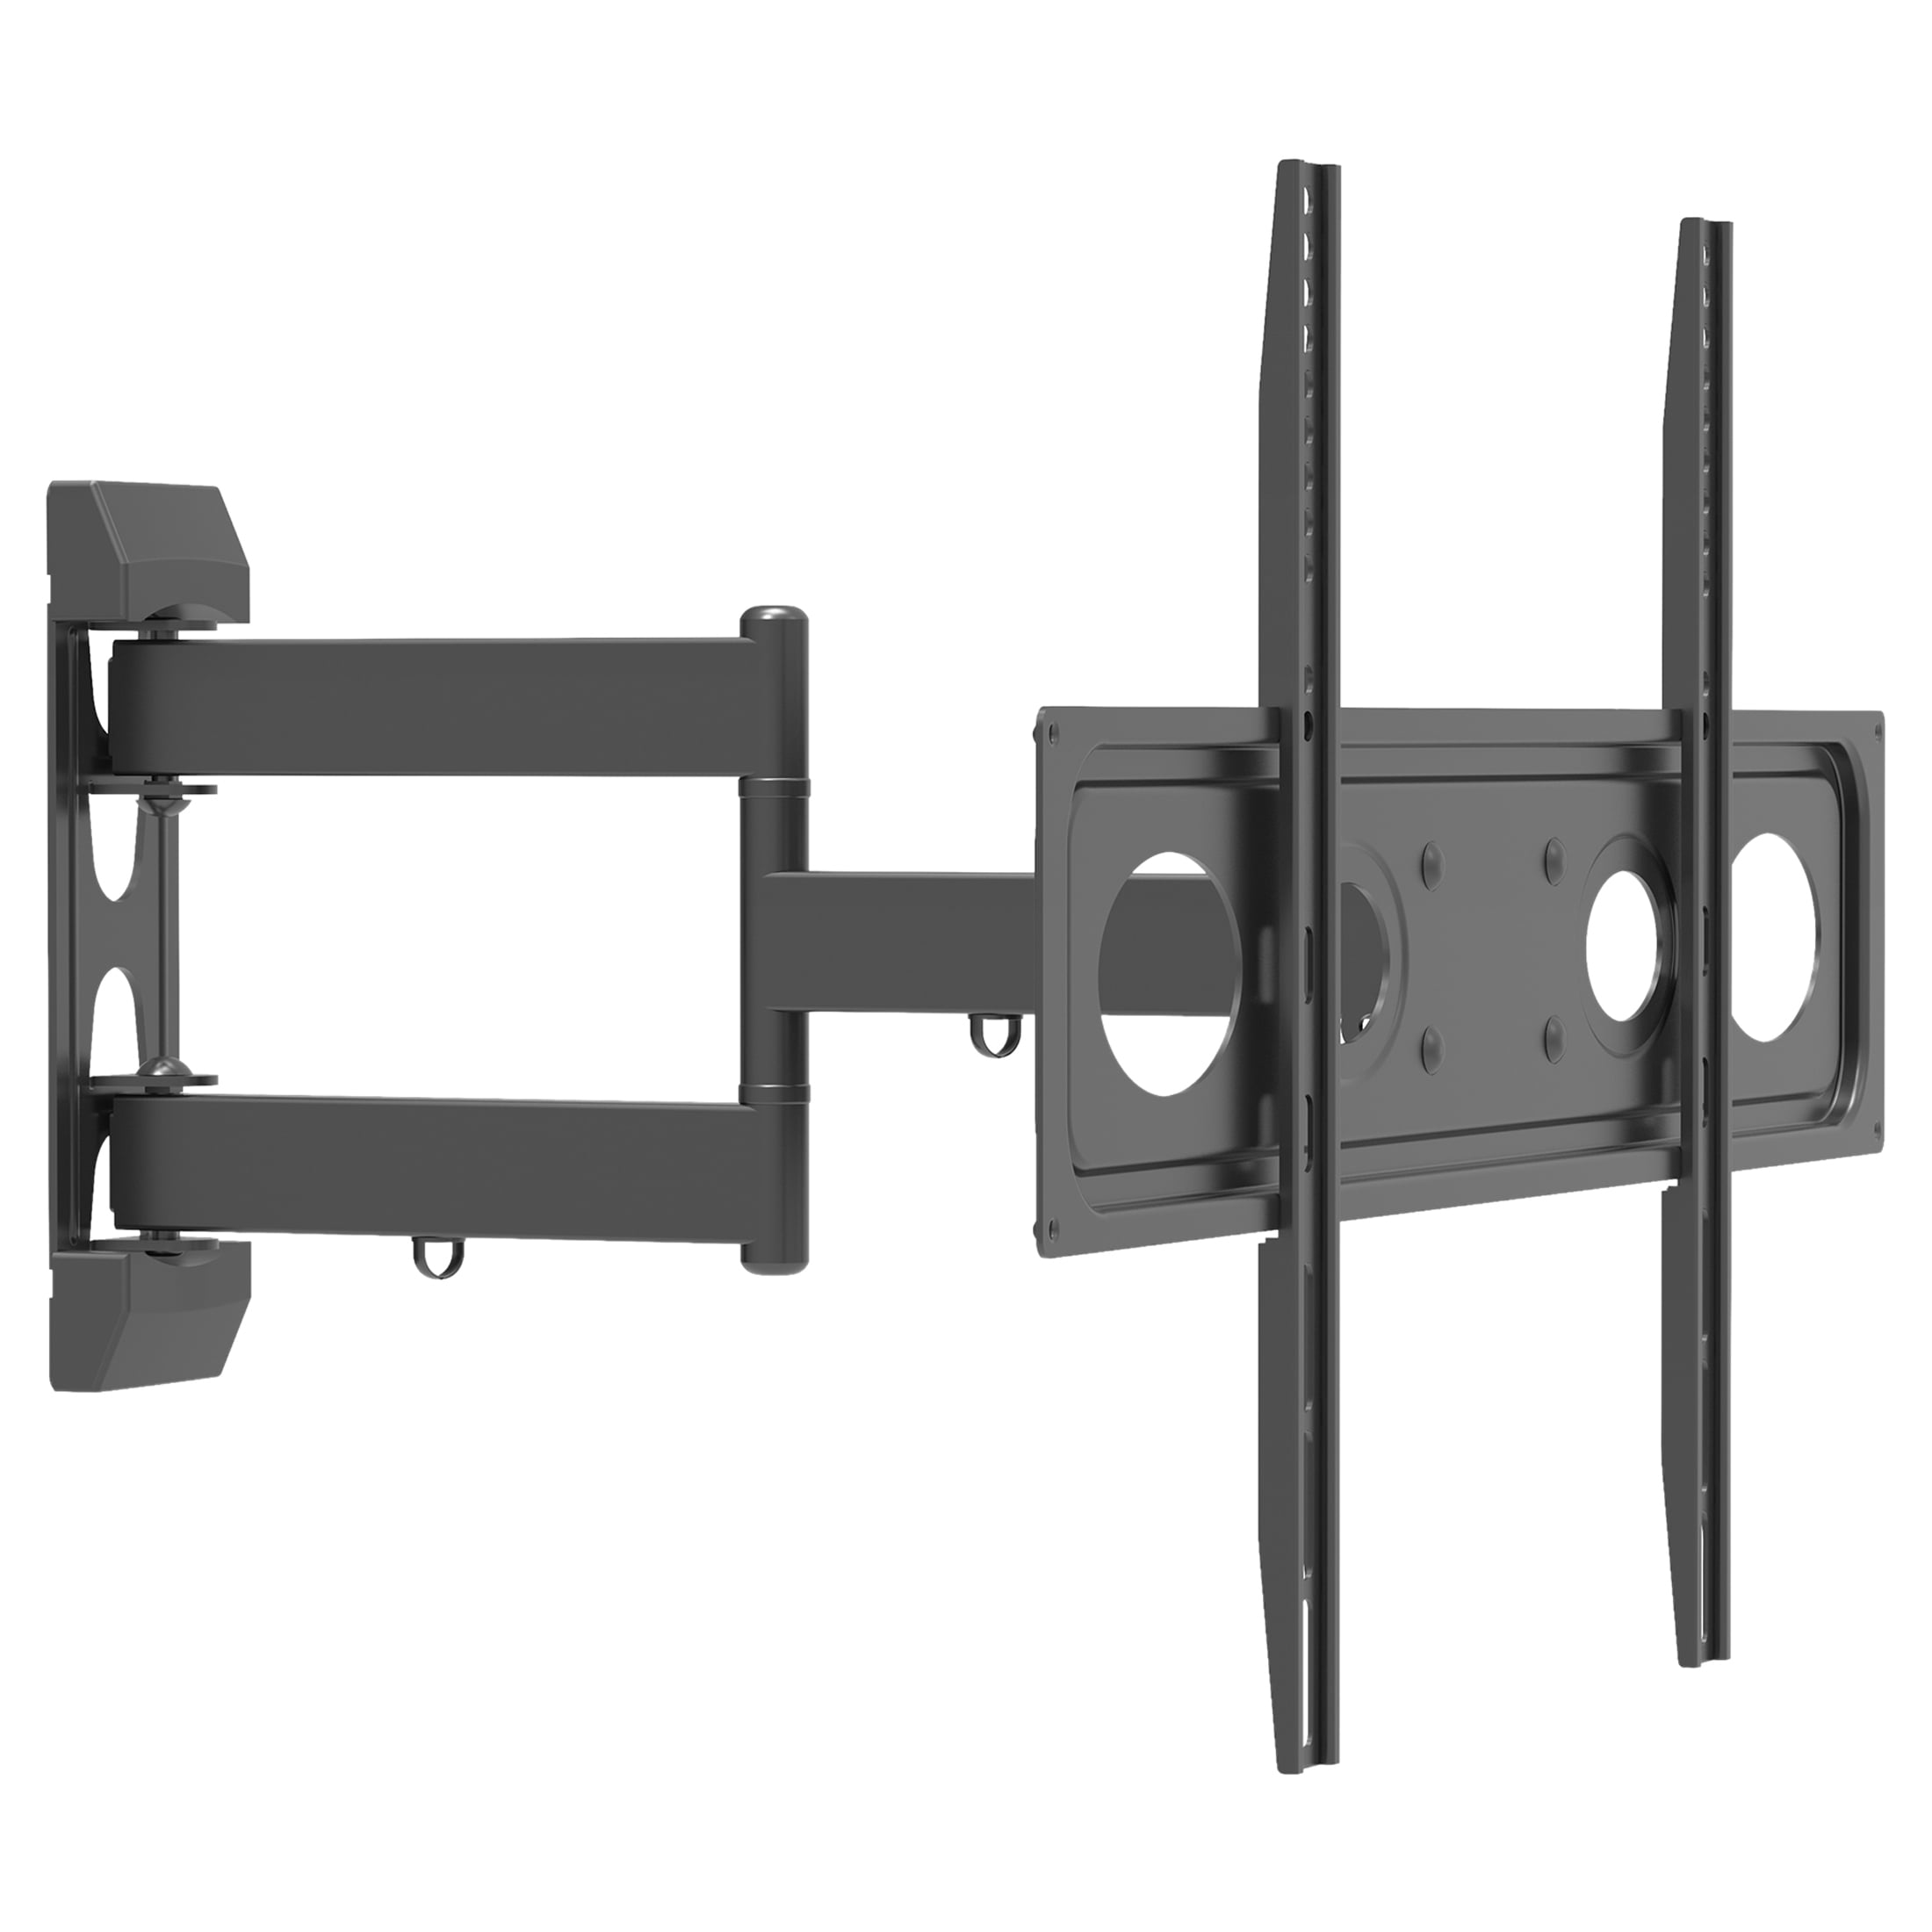 Xtreme Motion Wall Mount For 32-70 Inch Flat-Panel TVs, Swivels/Tilts, Holds 88 lbs, Compatible with Samsung model number: UN55TU7000 - Walmart.com